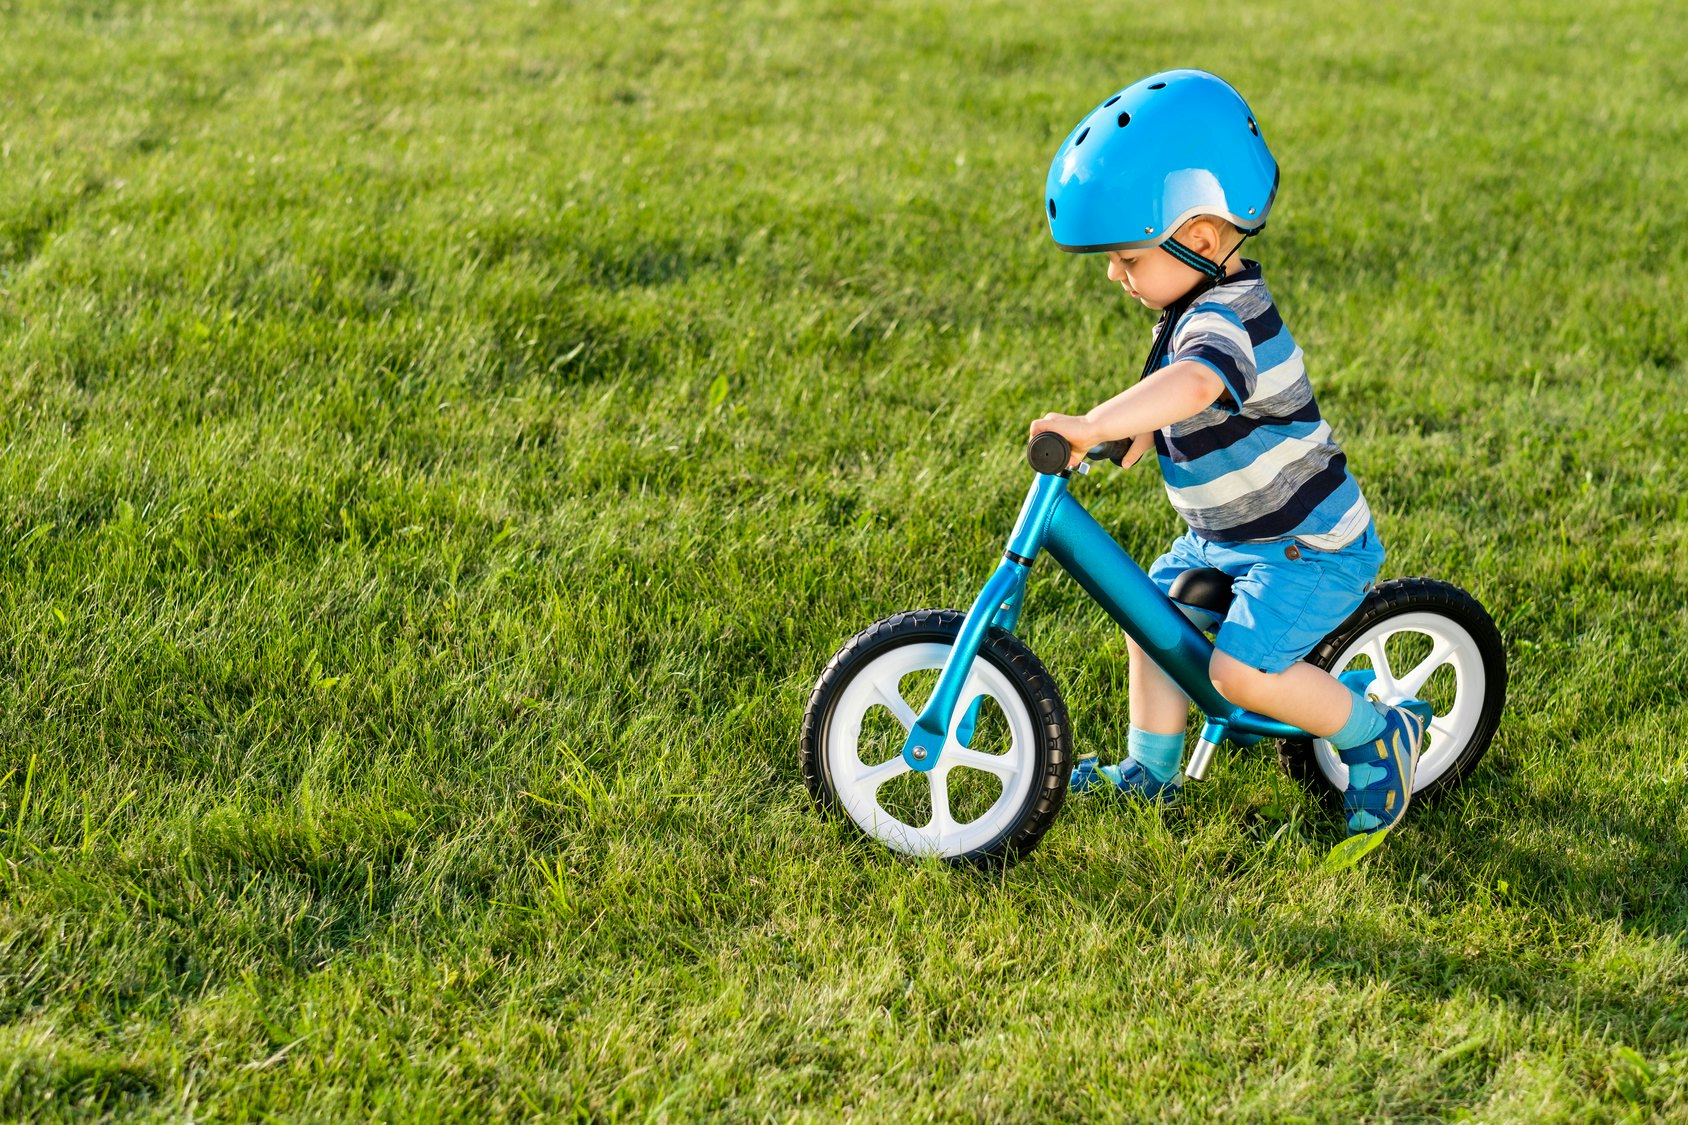 best age for a balance bike